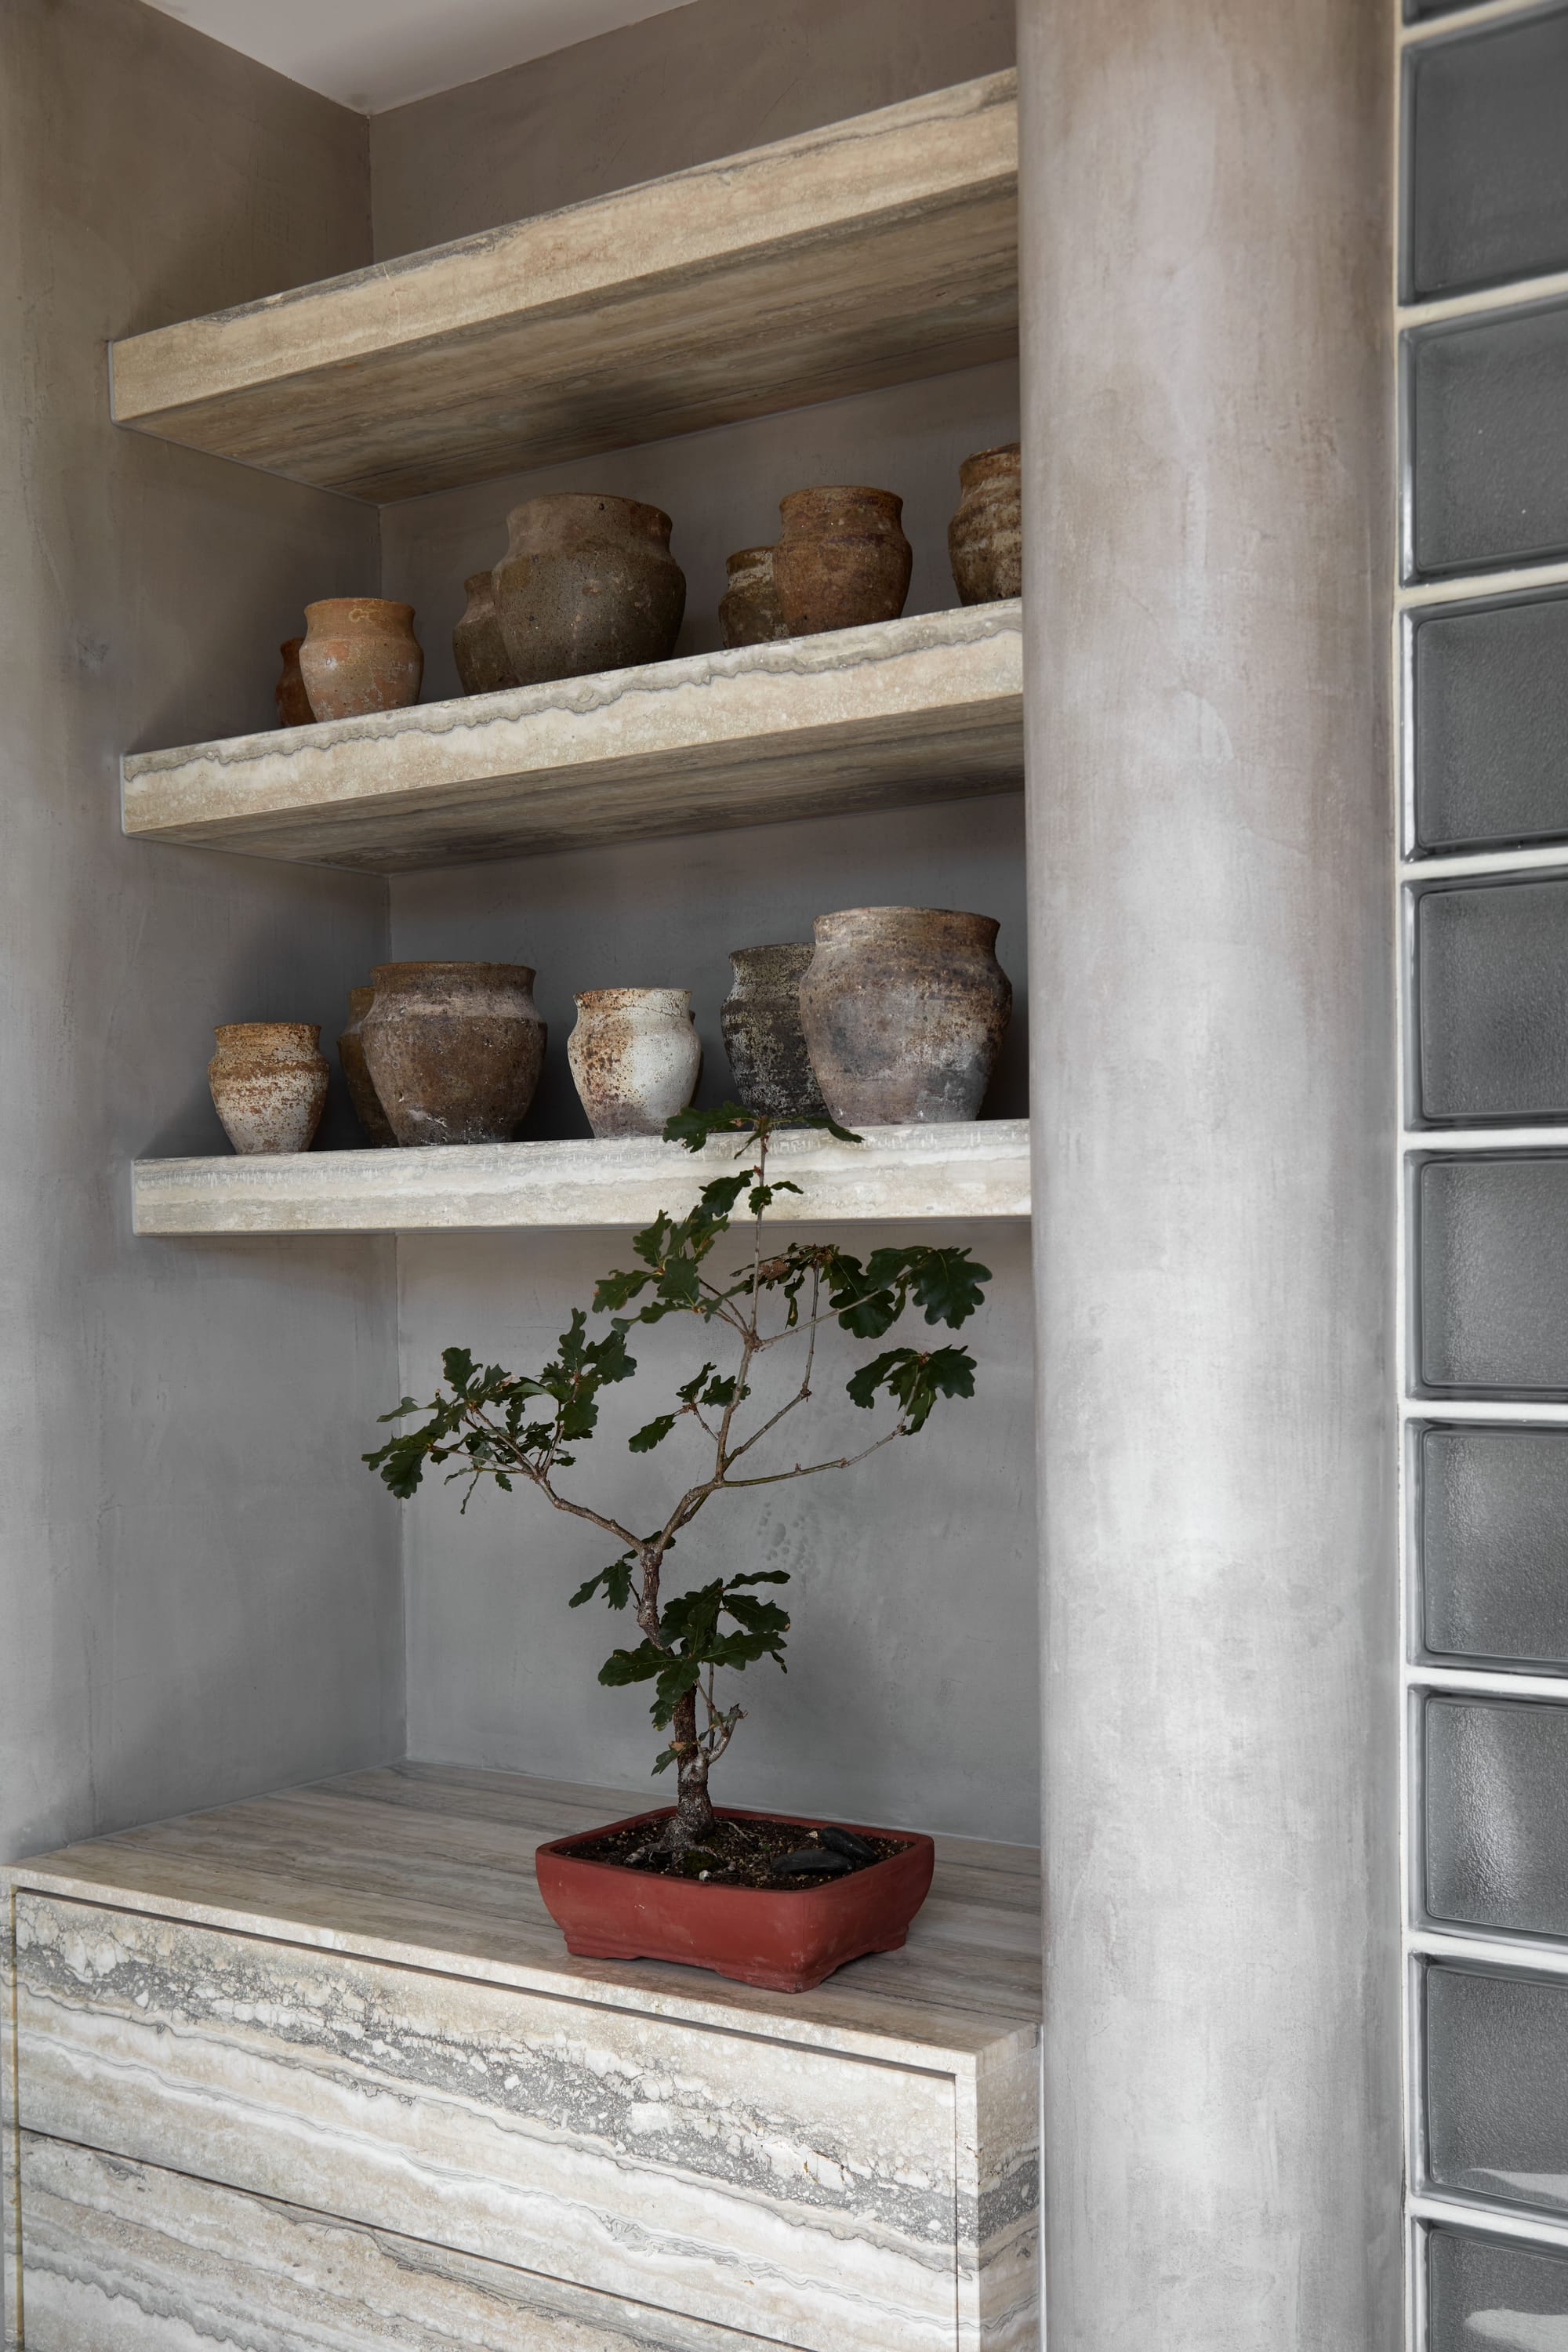 Zenn Showroom. Photography by Elisa Watson. Floor to ceiling shelving, storing cushions and vases. Concrete floors and walls. Glass block wall to left. 